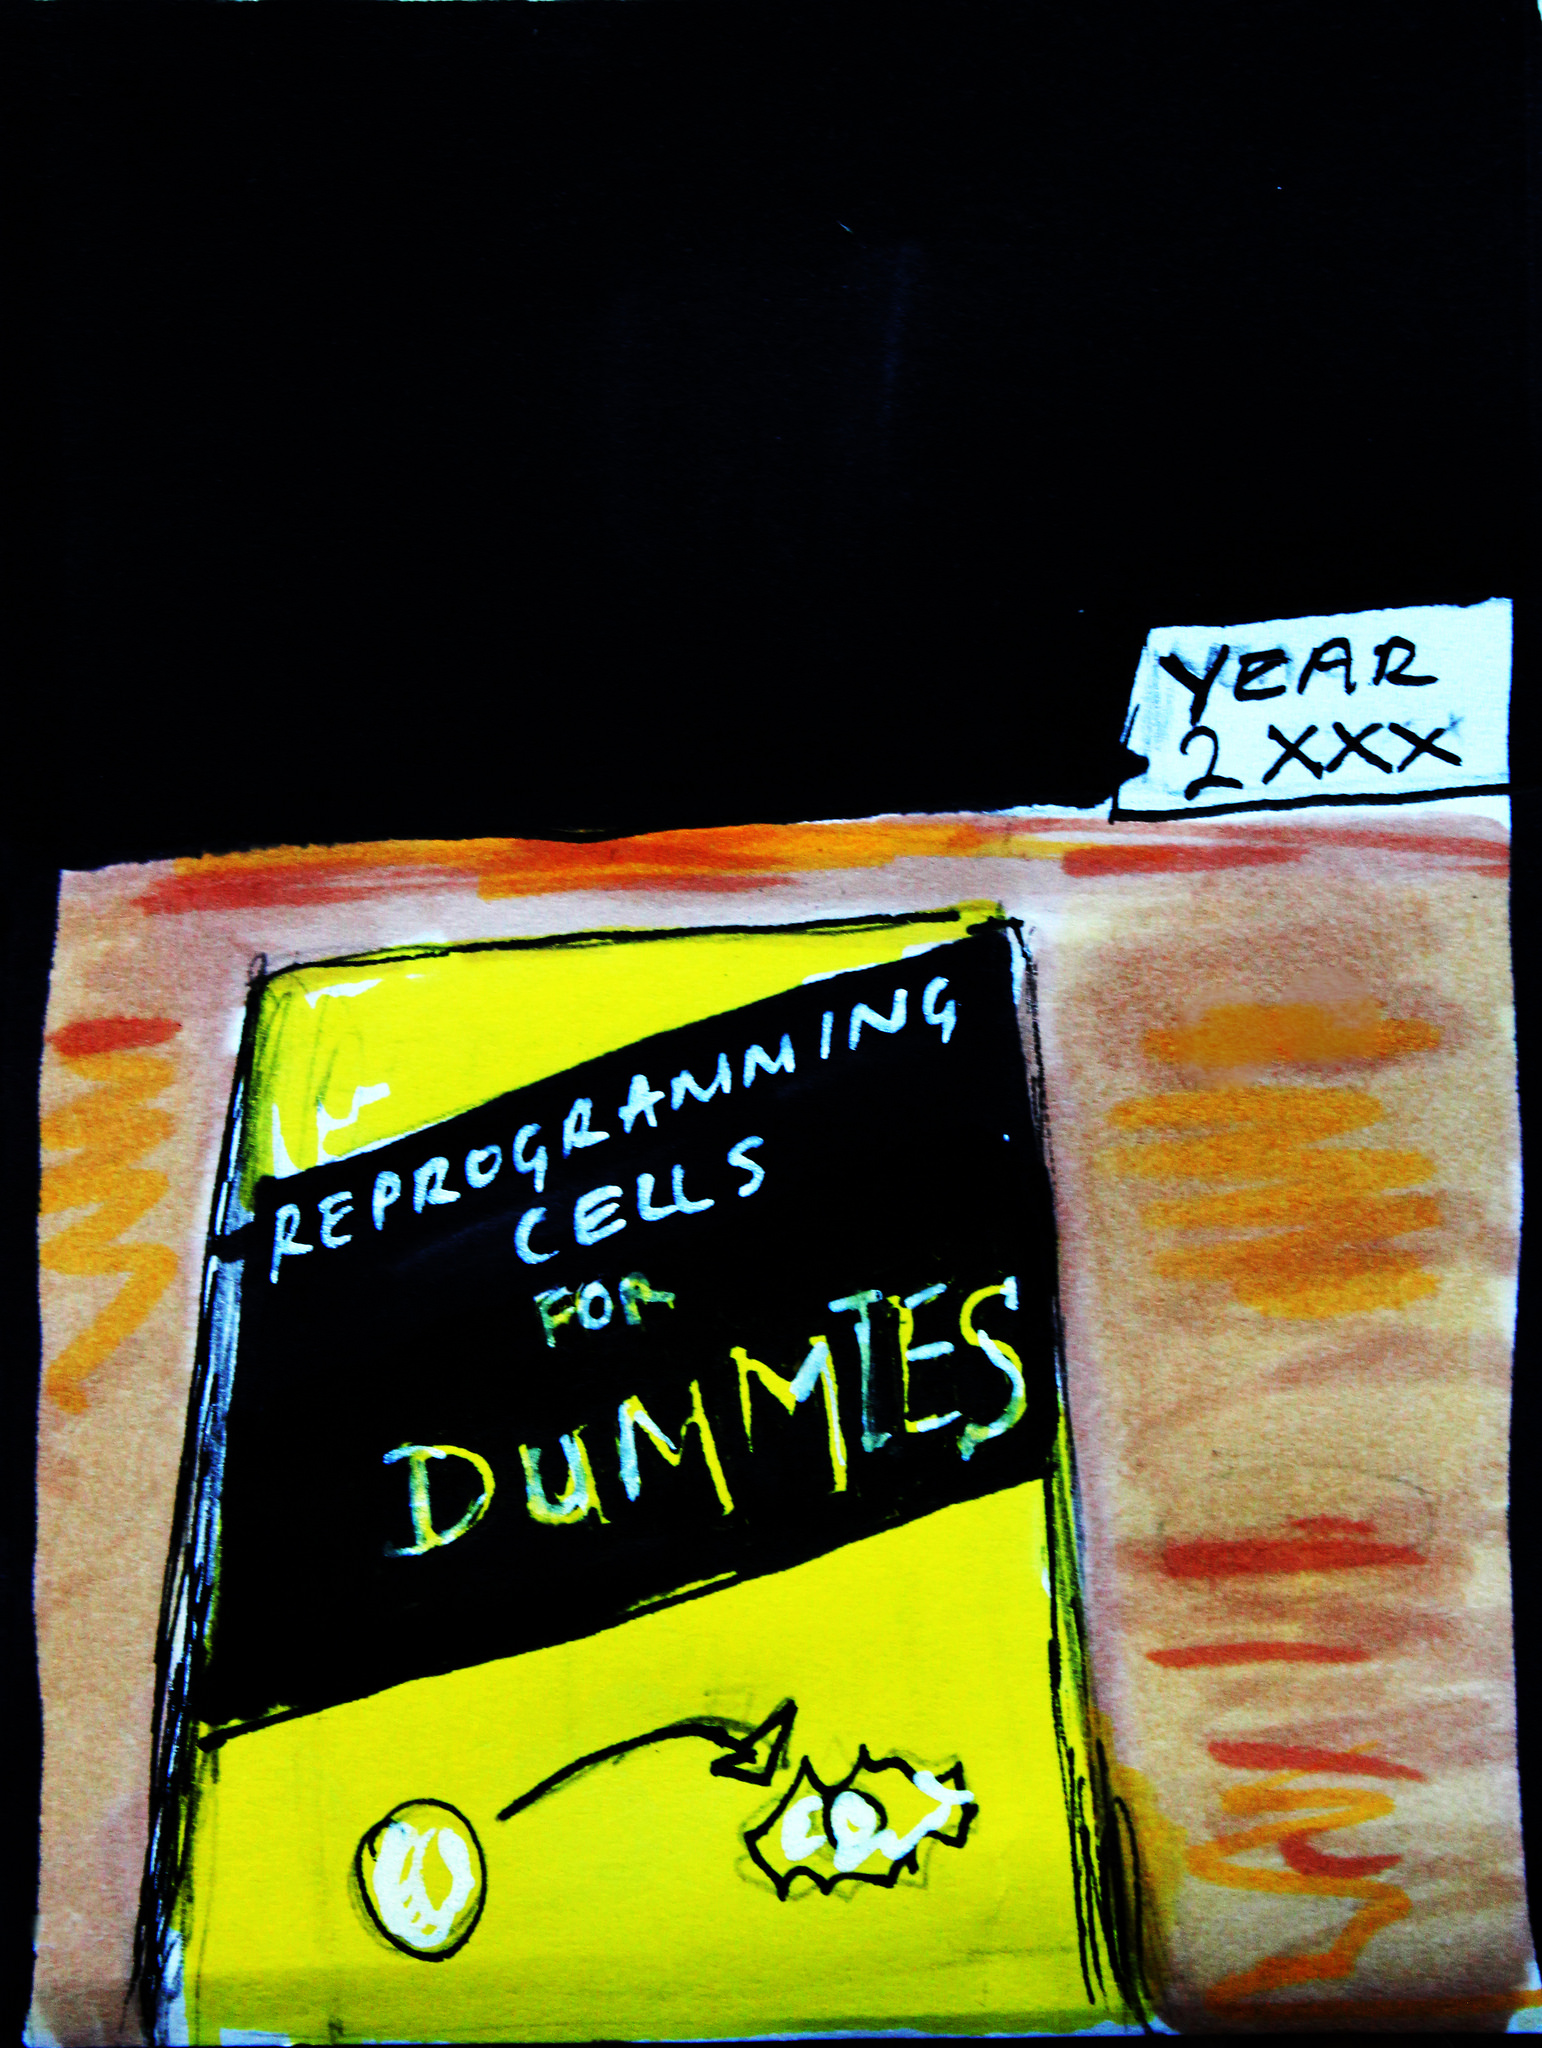 Hand-drawn illustration of 'Reprogramming Cells for Dummies' book'